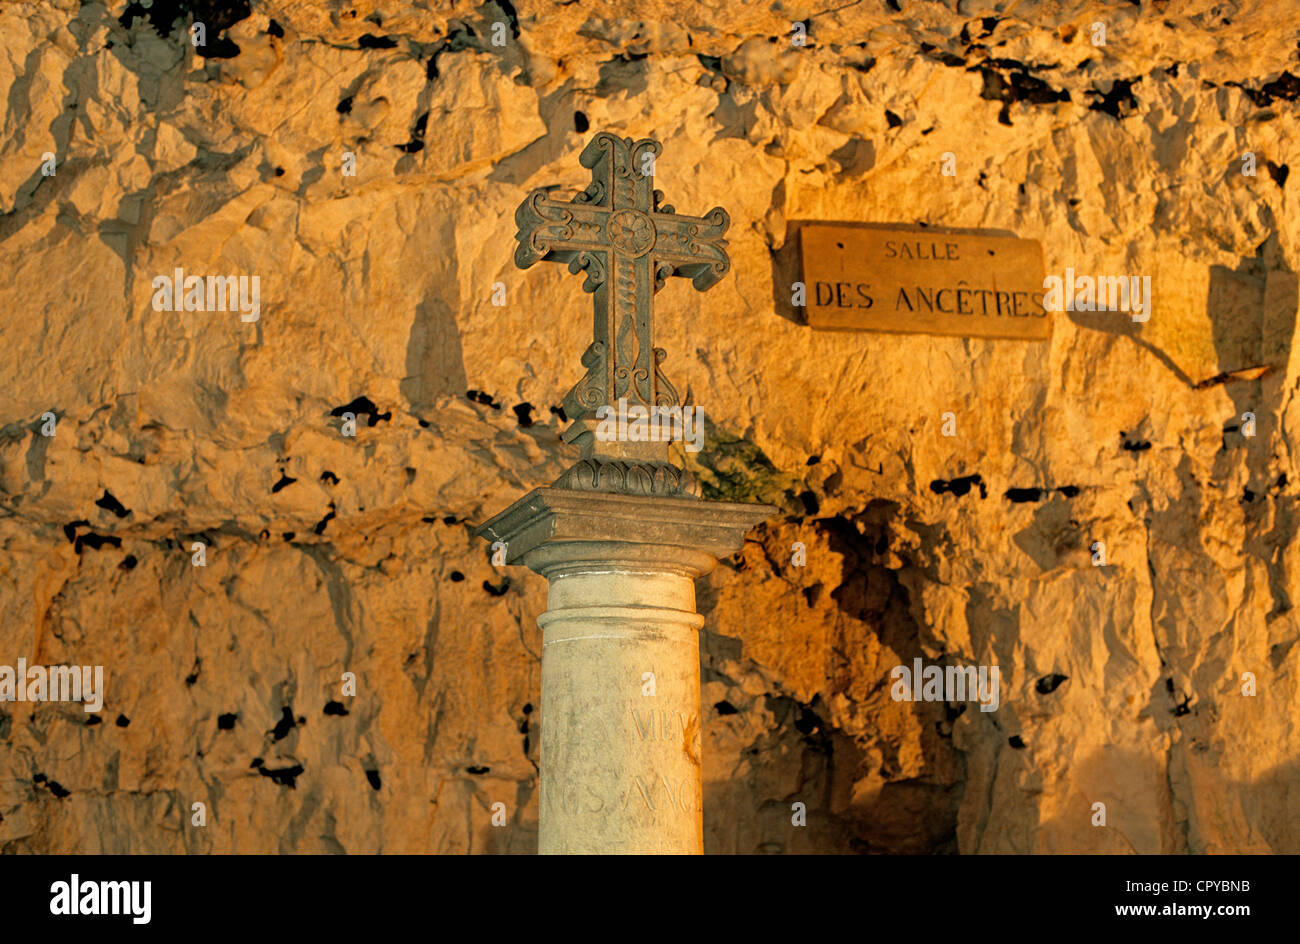 France, Somme, caves of Naours, Monument dedicated to the ancestors Stock Photo